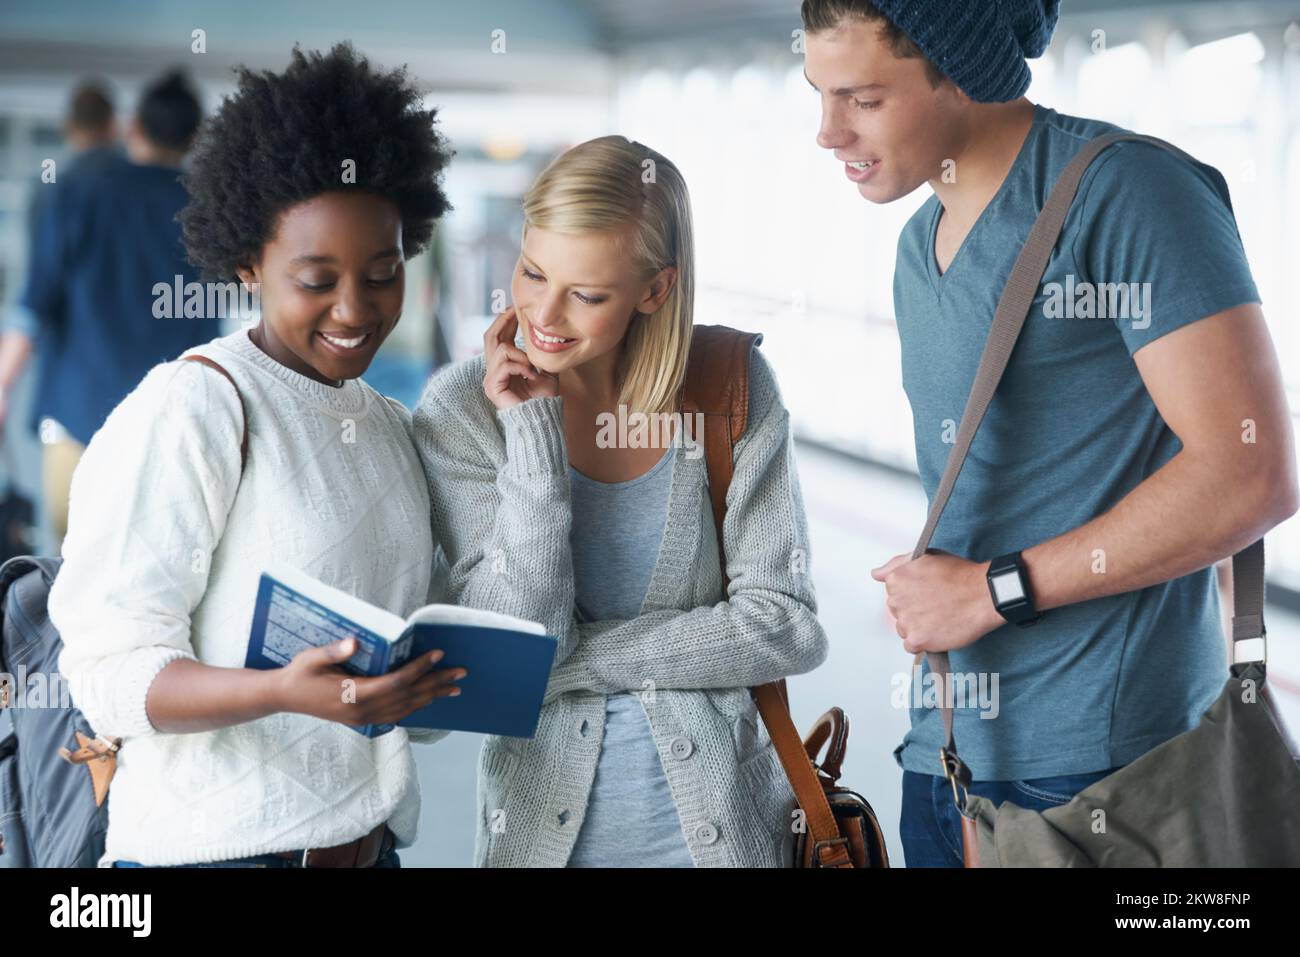 Fascinated and eager to learn. A group of college students looking at a book together. Stock Photo